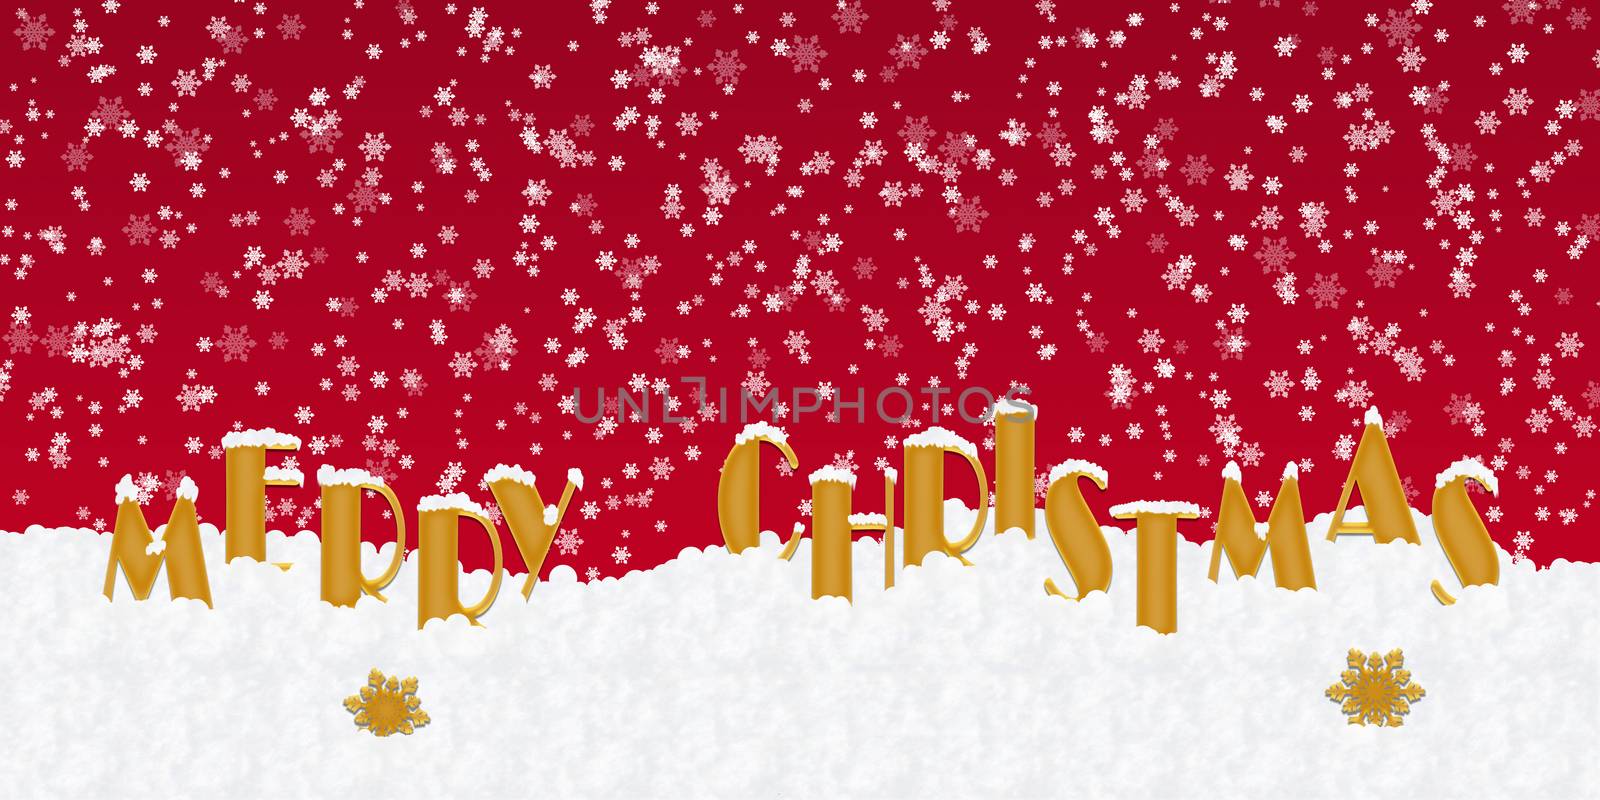 Blank for Christmas greetings with letters on snow and red Christmas background